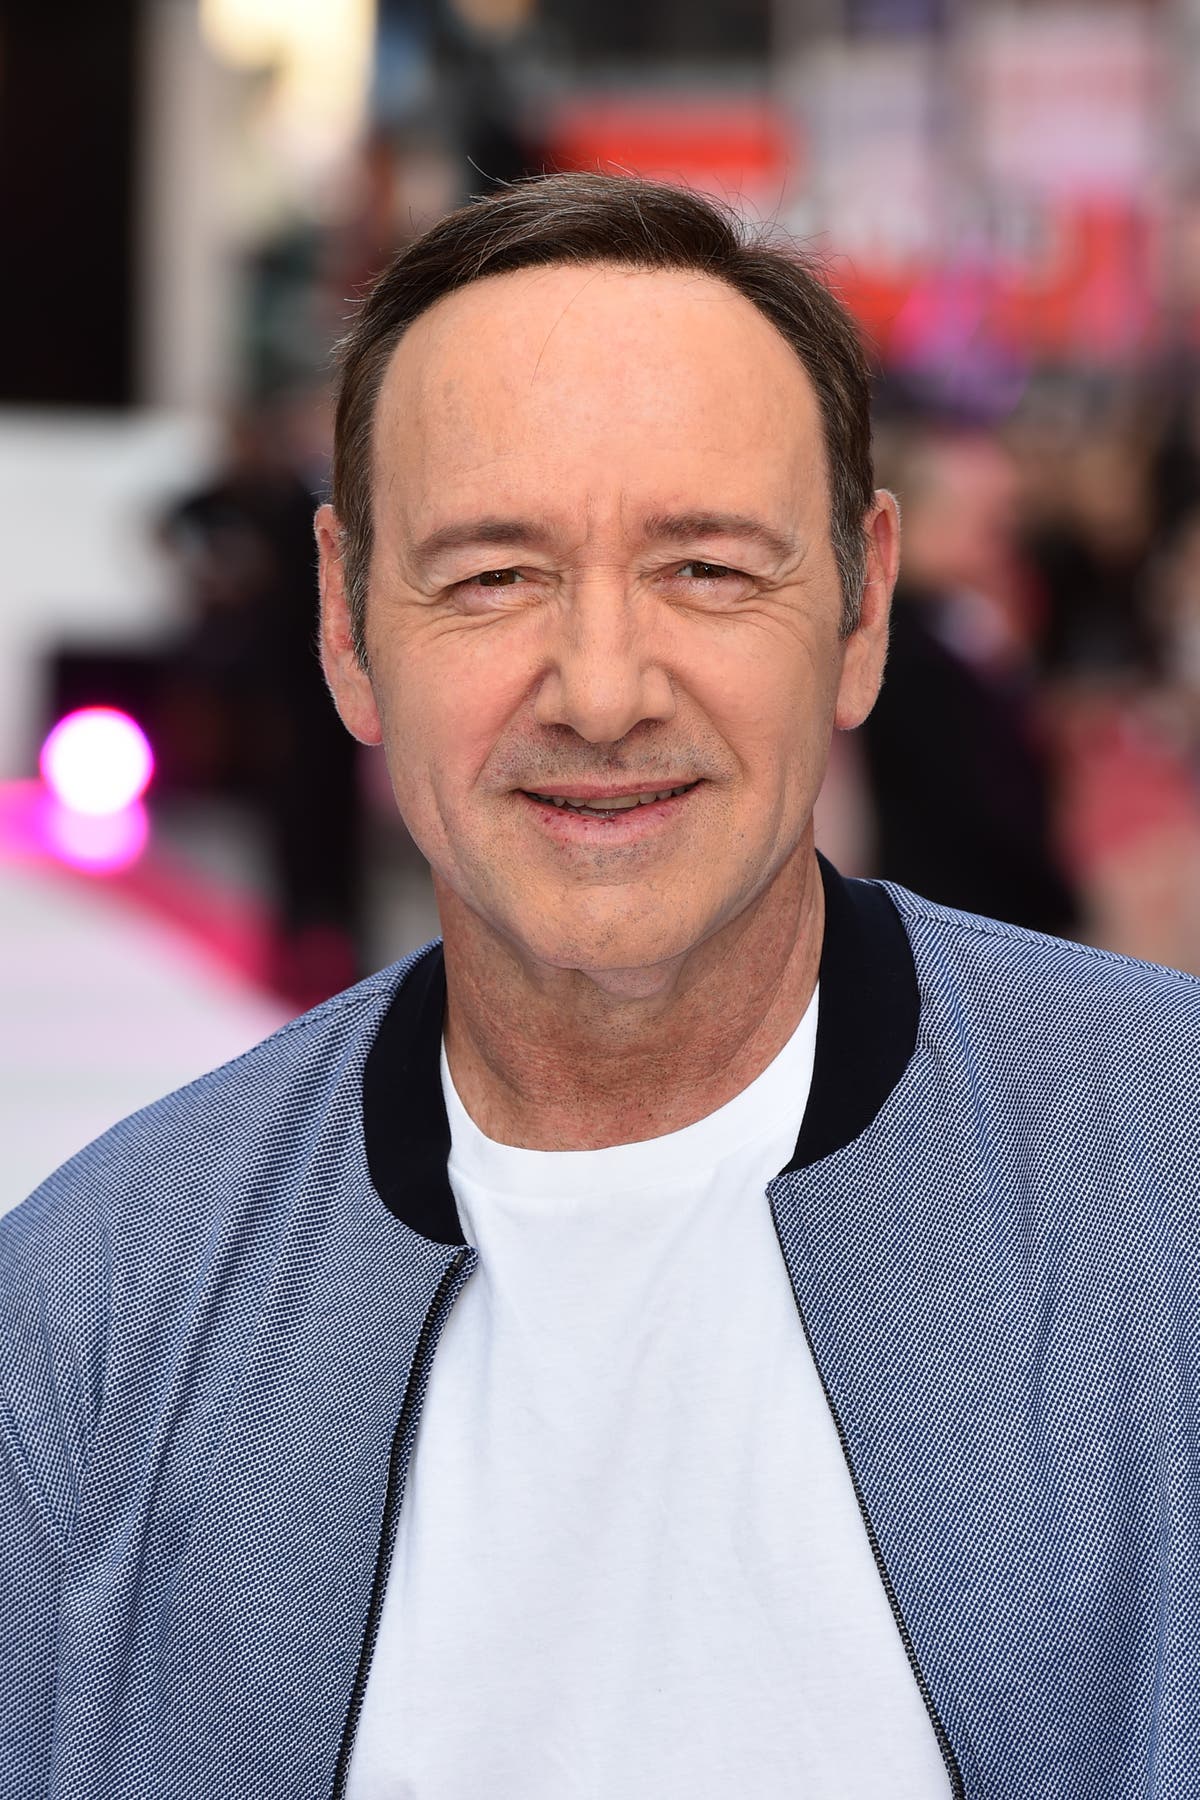 Hollywood actor Kevin Spacey charged with four sexual assaults